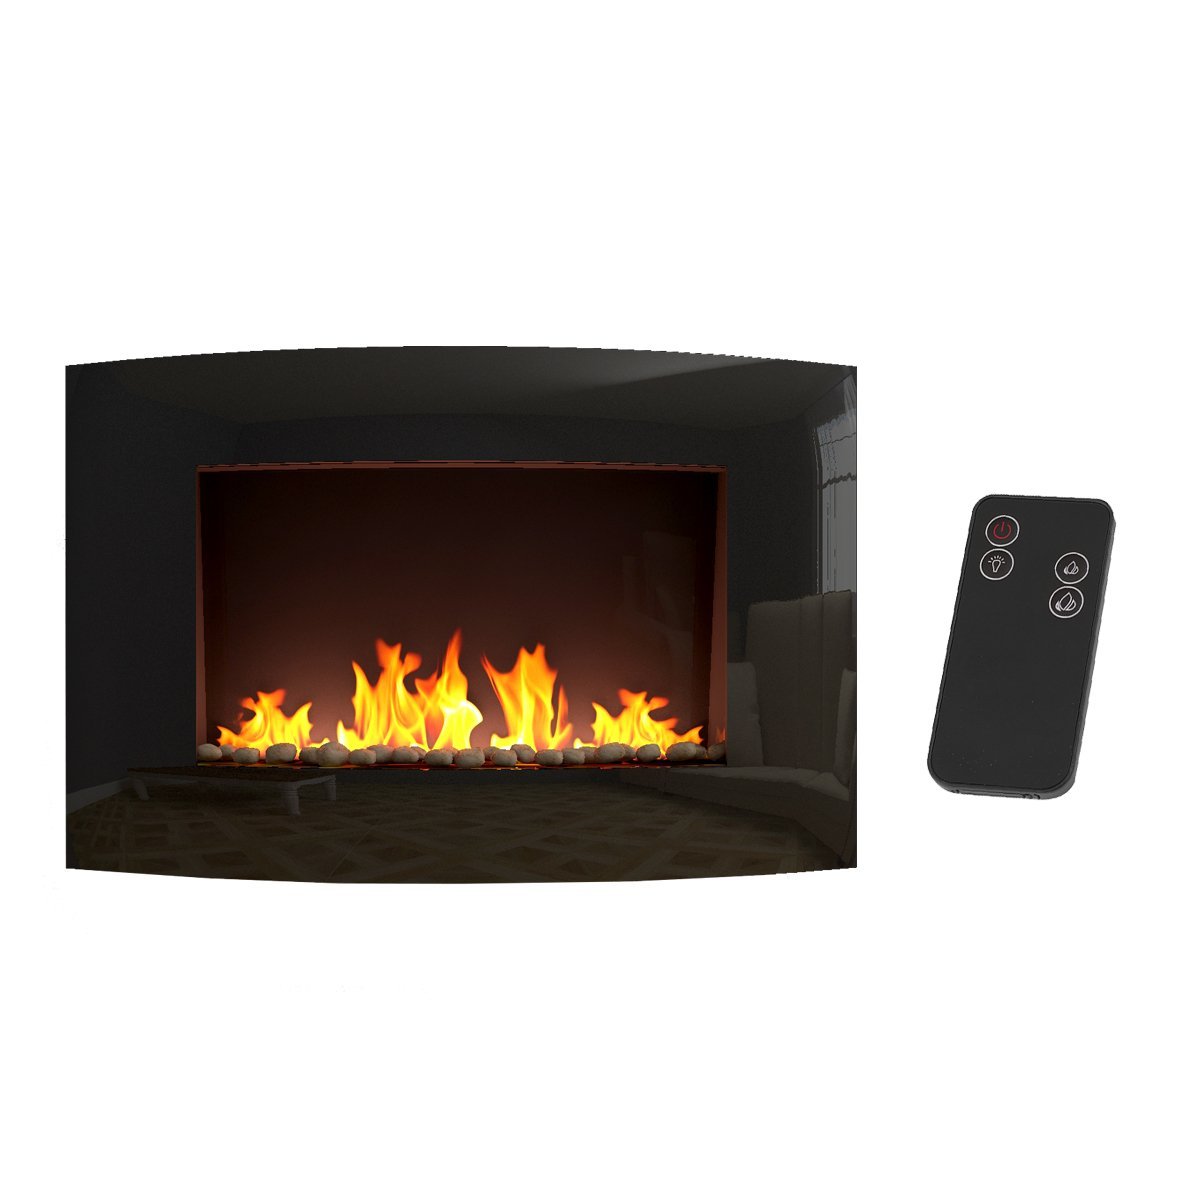 How to Fix Flame On Electric Fireplace Luxury Bon Wall Mounted Electric Fireplace Glass Heater Fire with Remote Control Living Room W659 X D140 X H520 Mm